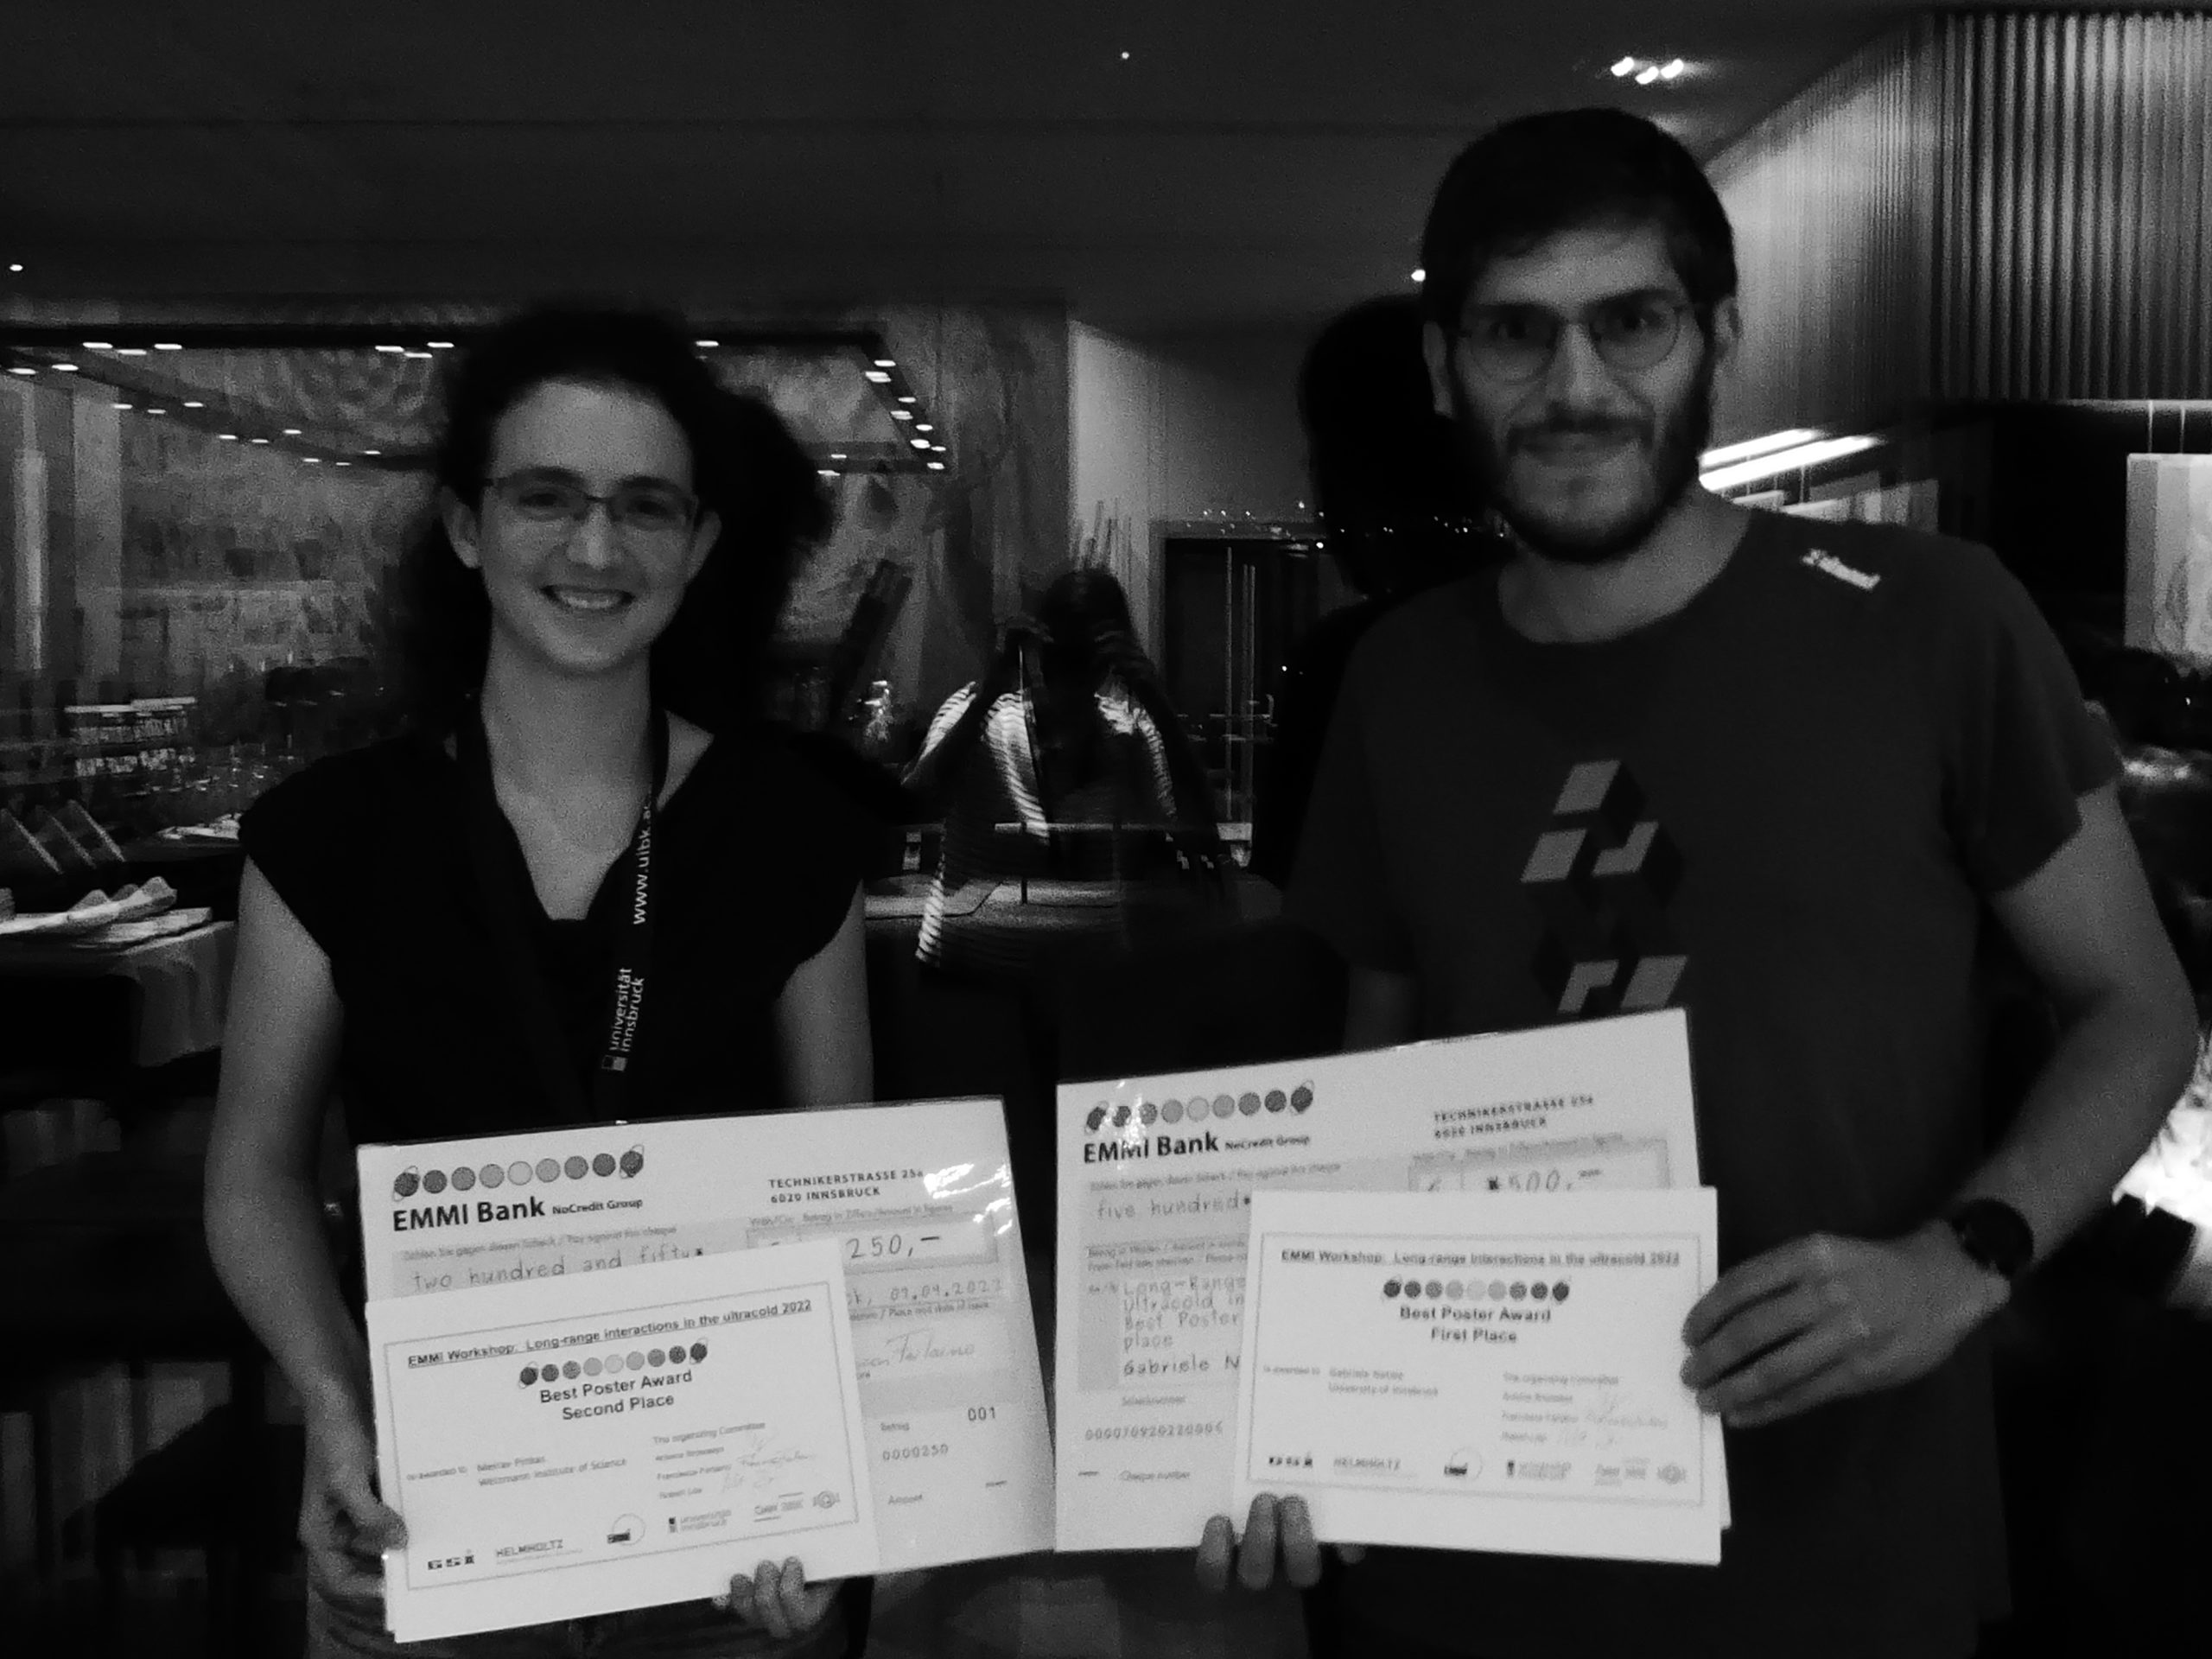 Poster prize winners